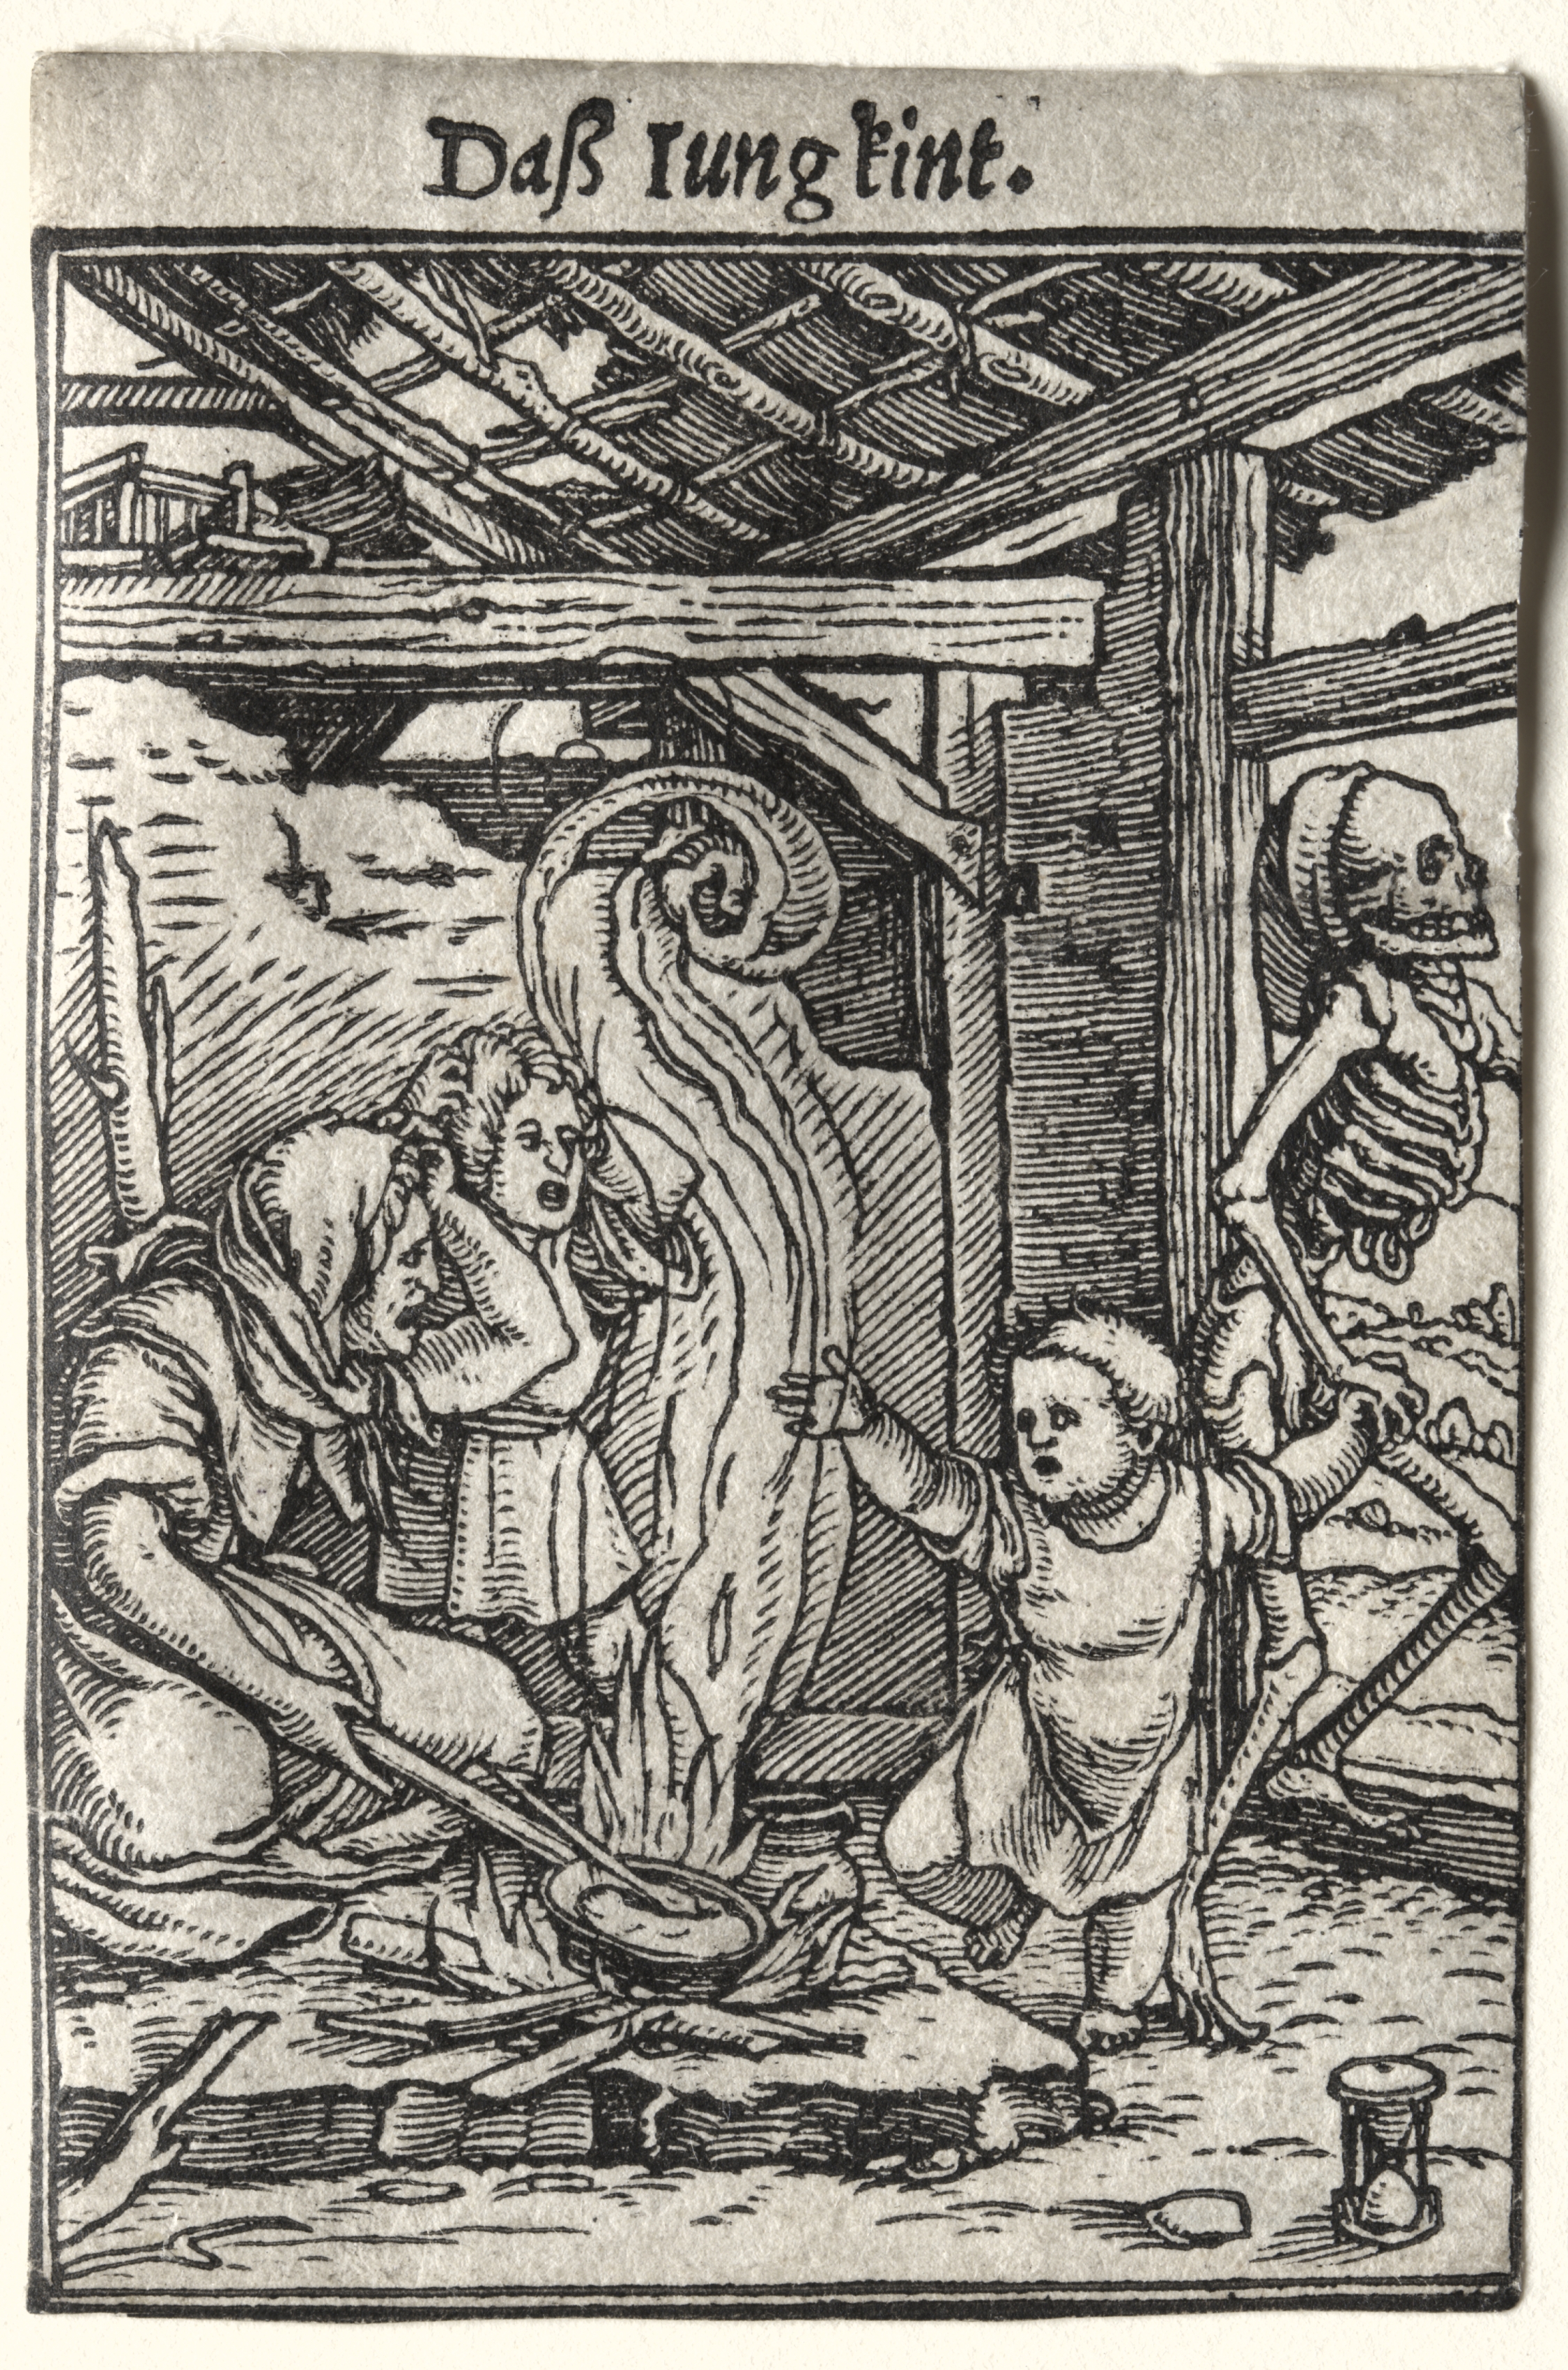 Dance of Death:  The Child